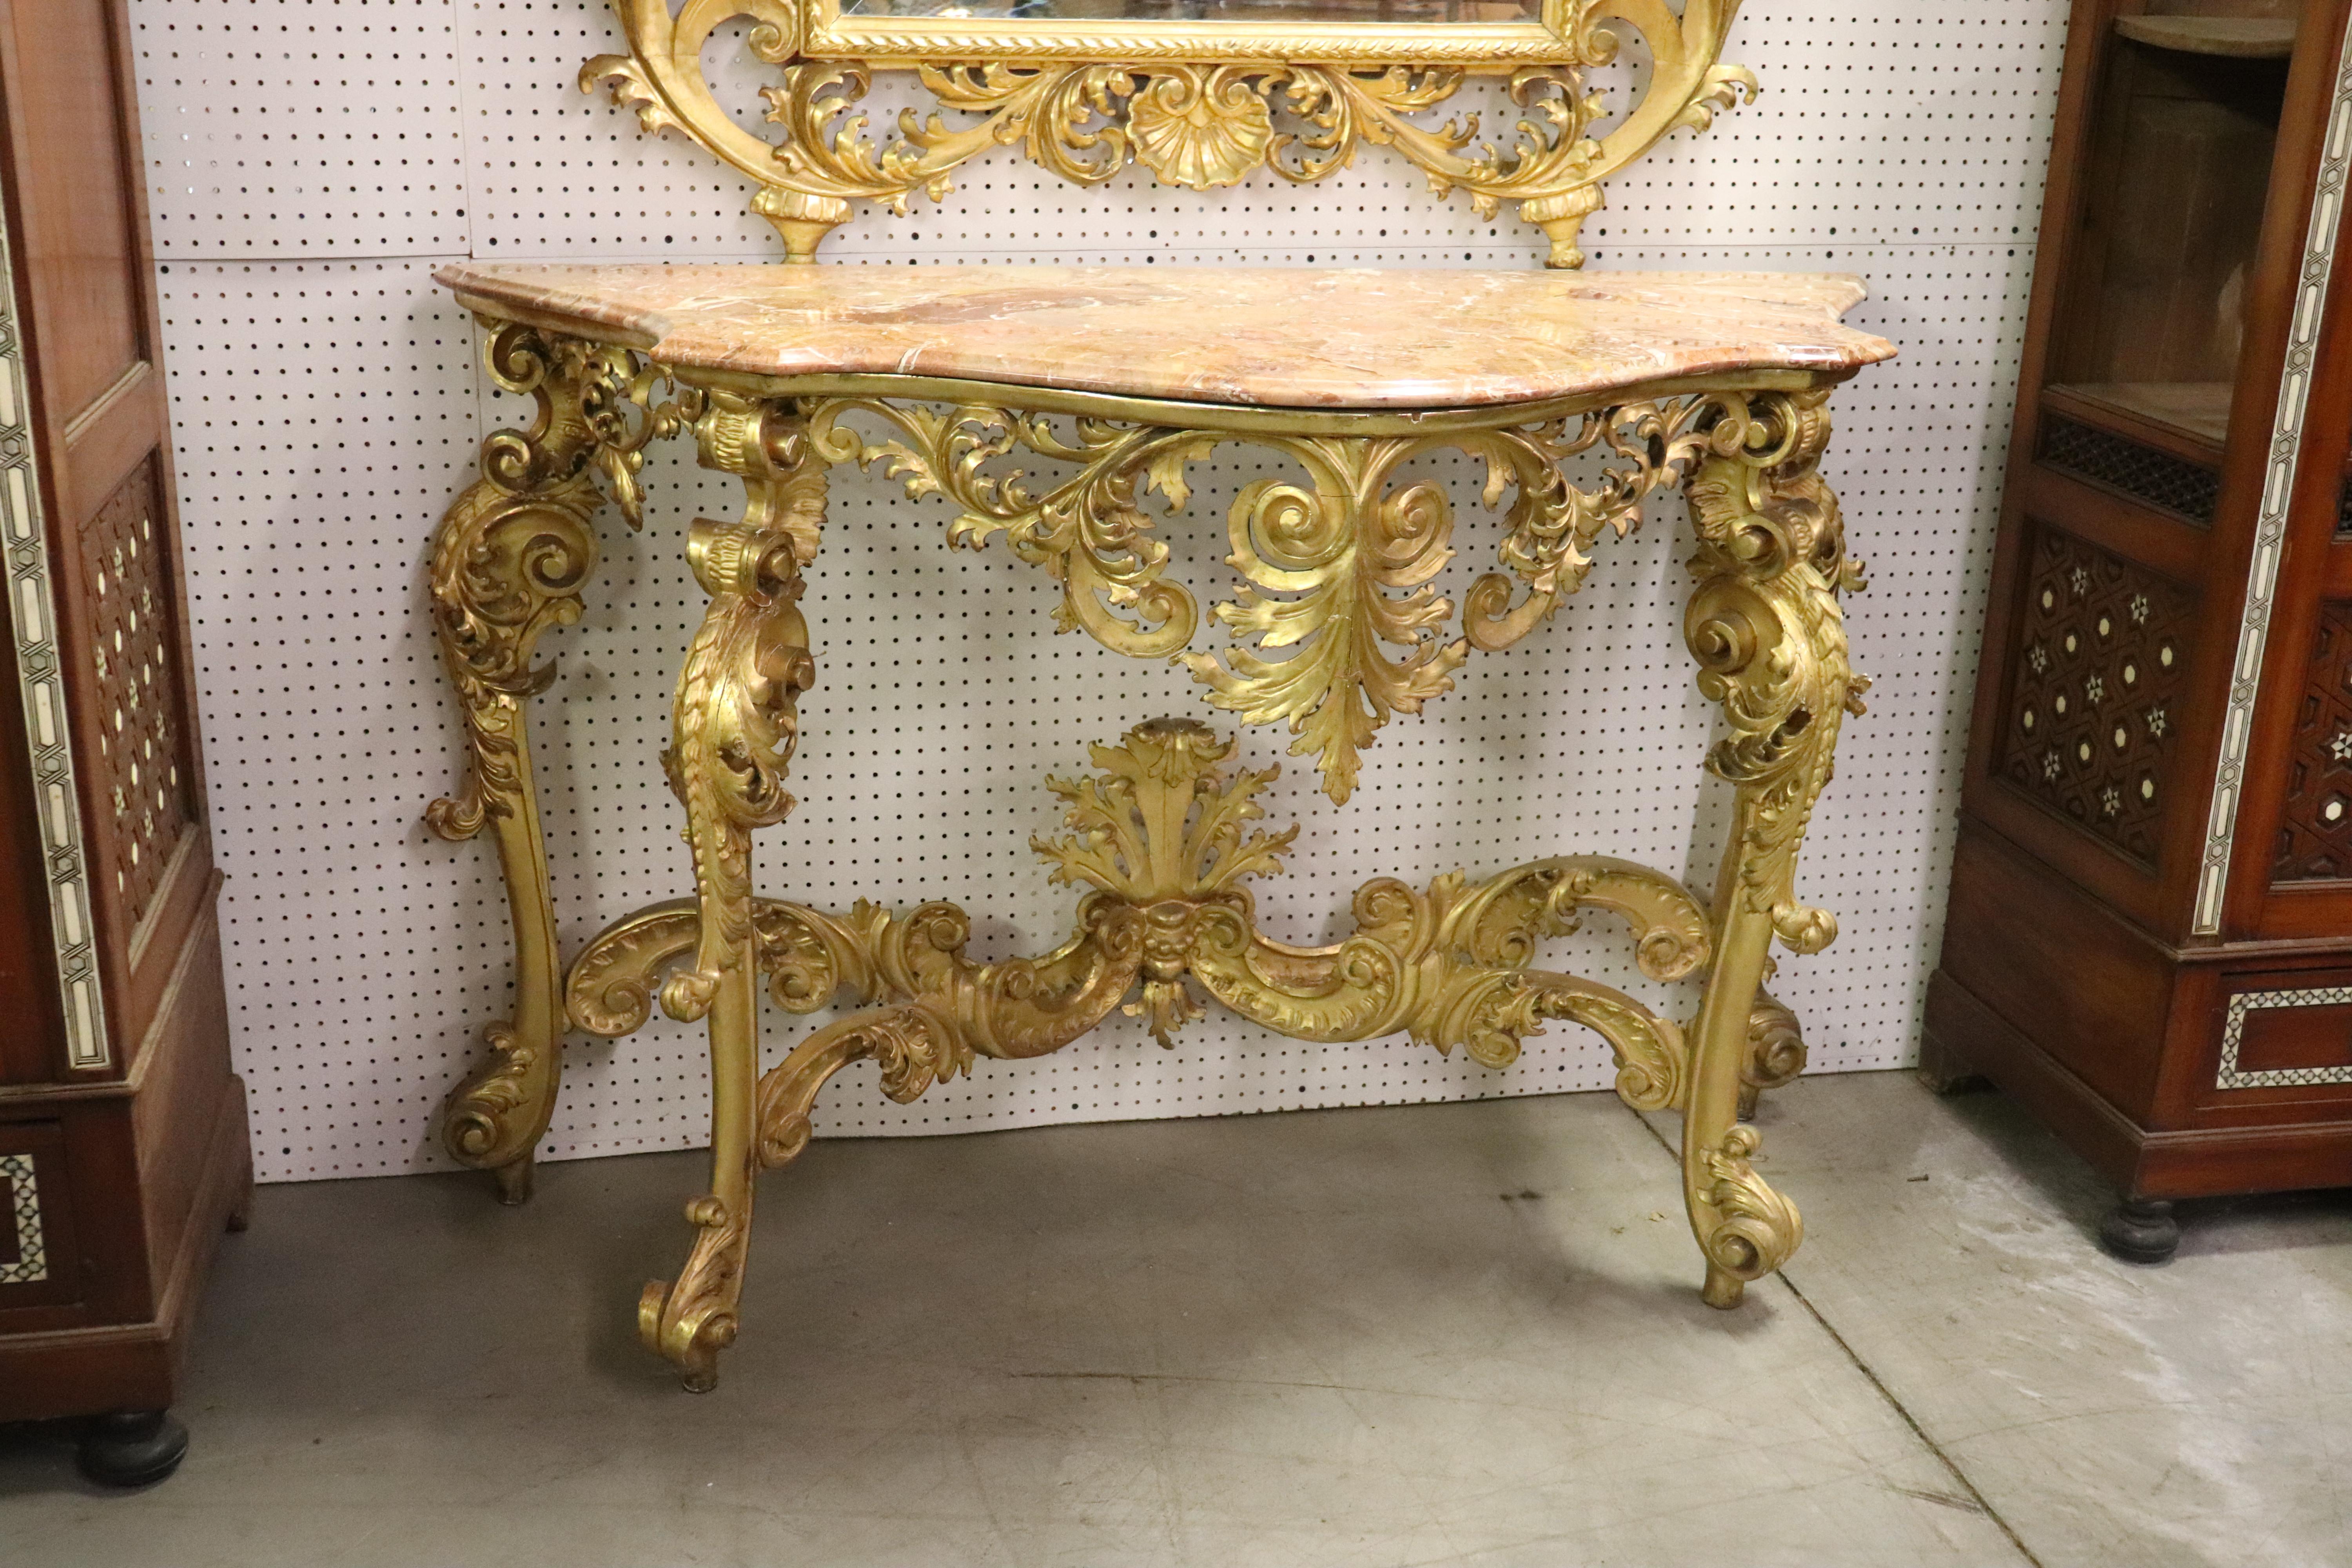 Monumental Giltwood Florentine Mirror with Marble-Top Console Table, circa 1940 For Sale 2